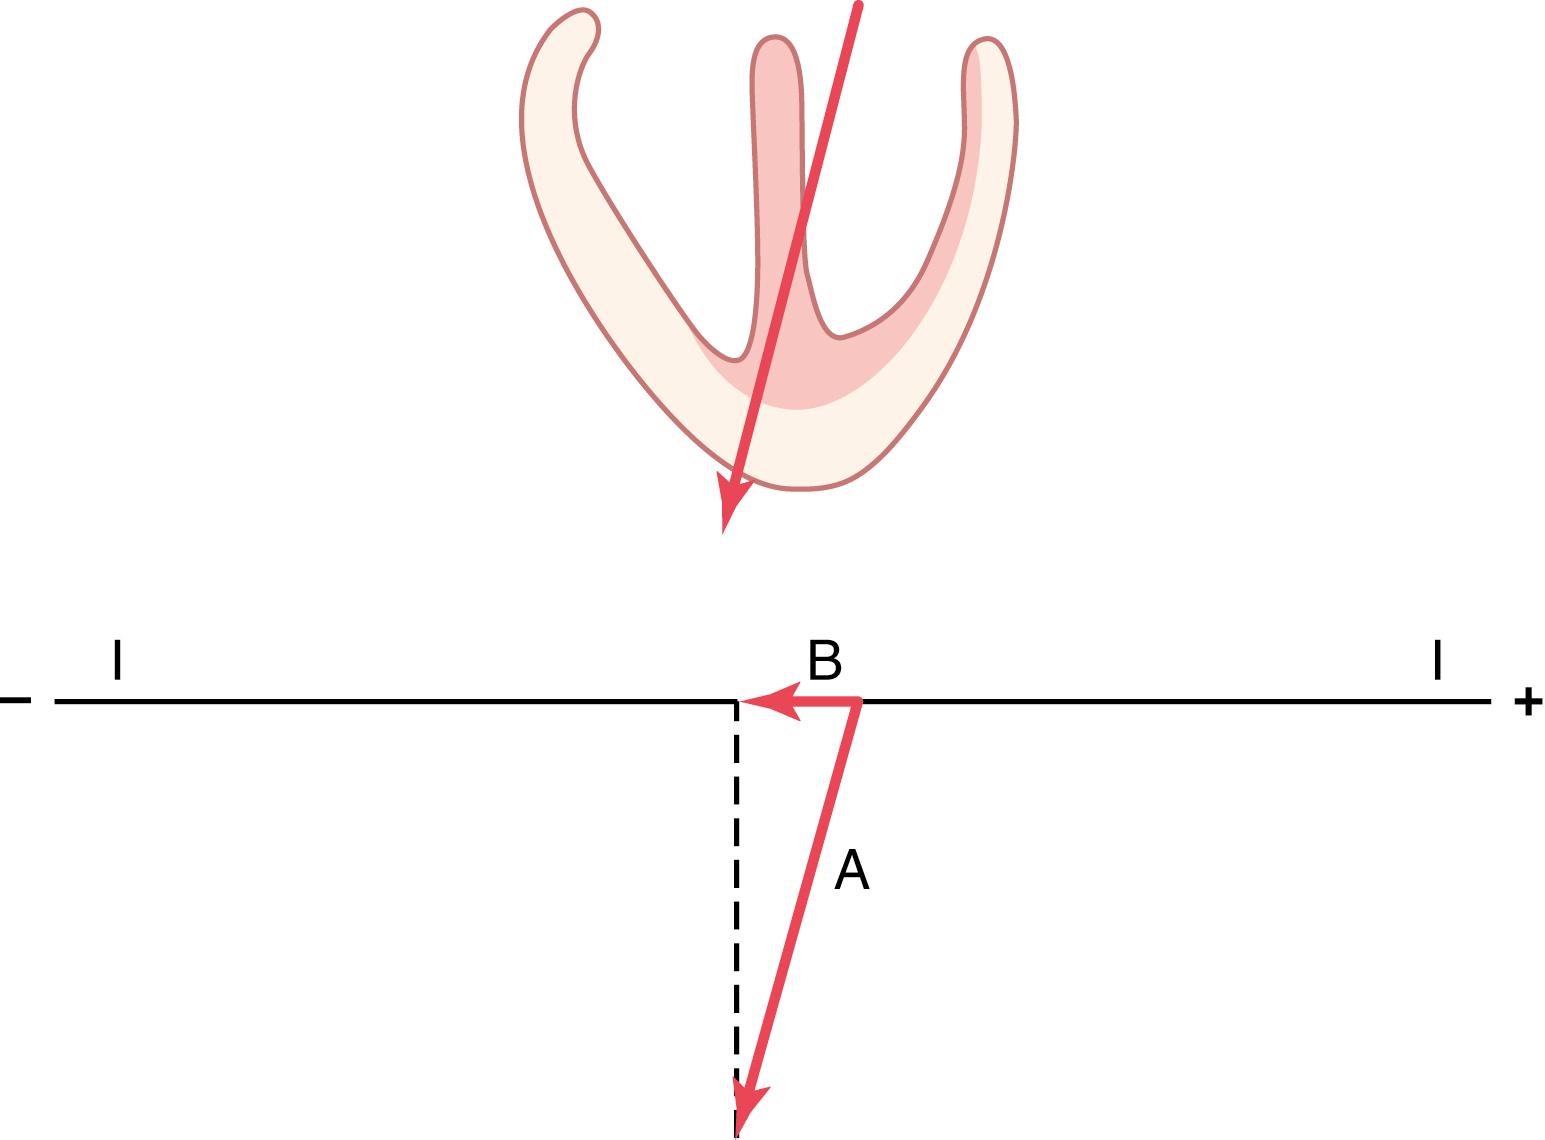 Figure 12-5, Determination of the projected vector B along the axis of lead I when vector A represents the instantaneous potential in the ventricles.